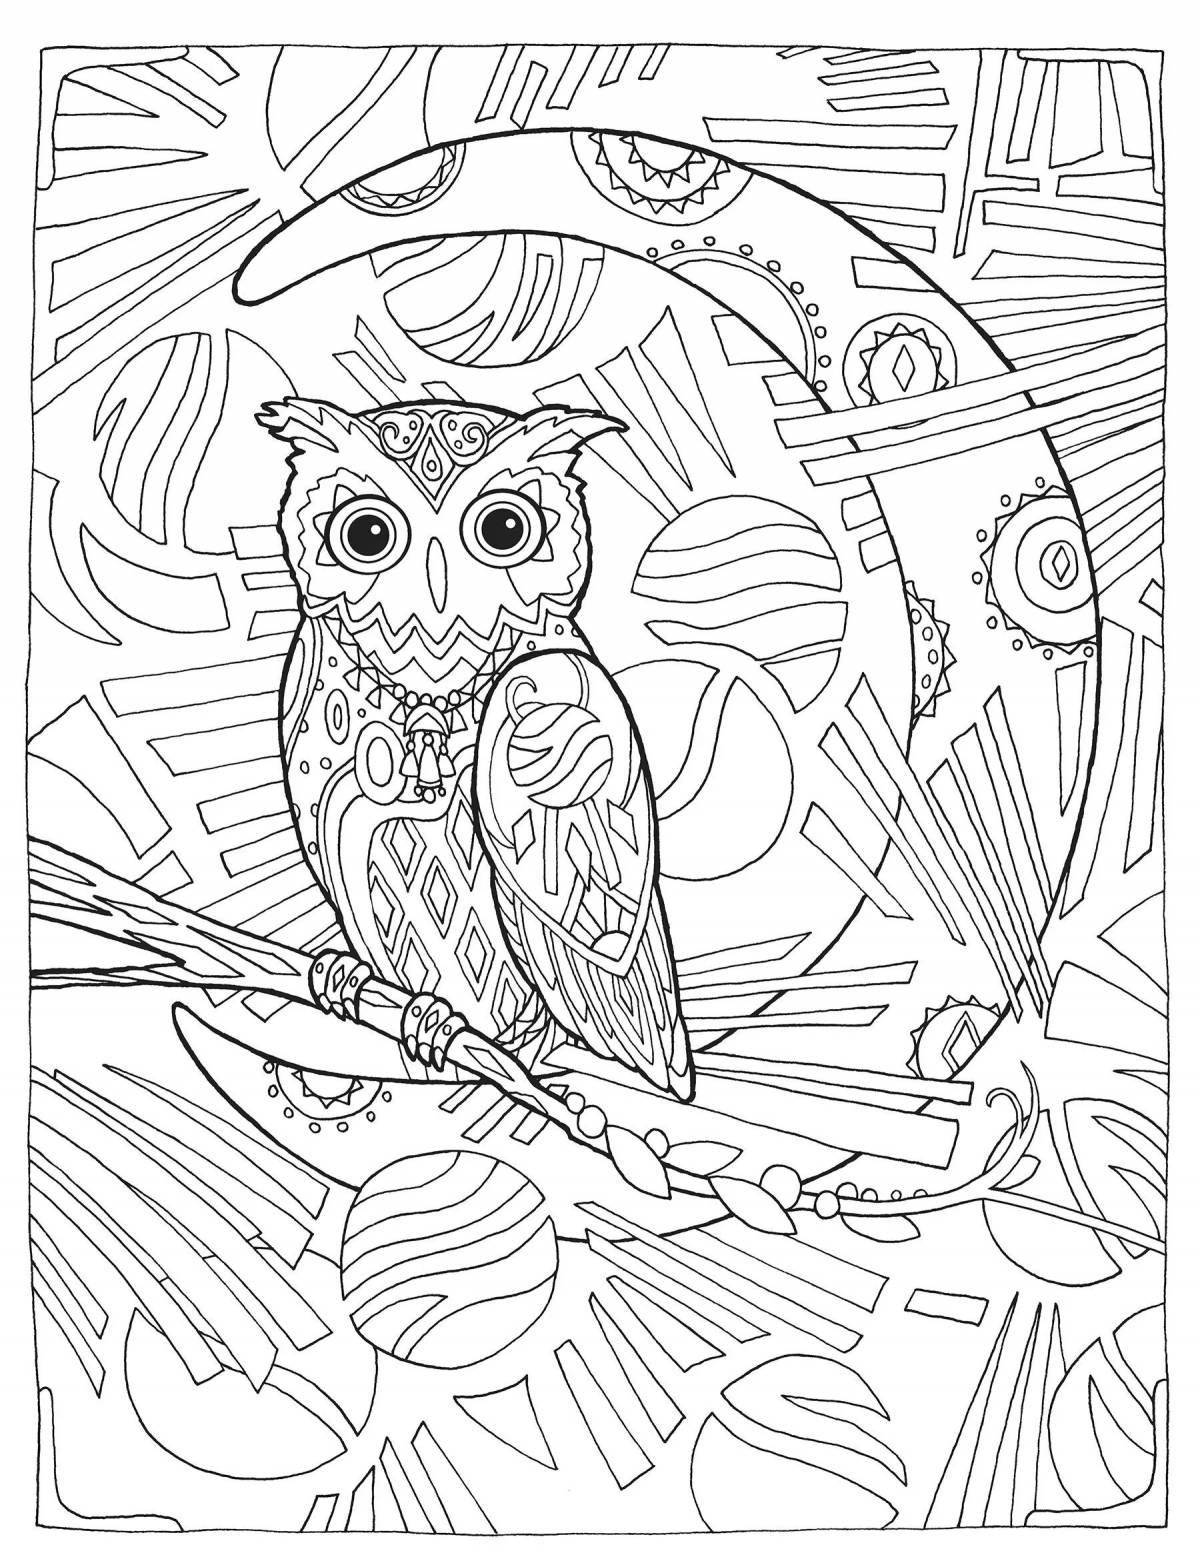 Live coloring owl by numbers